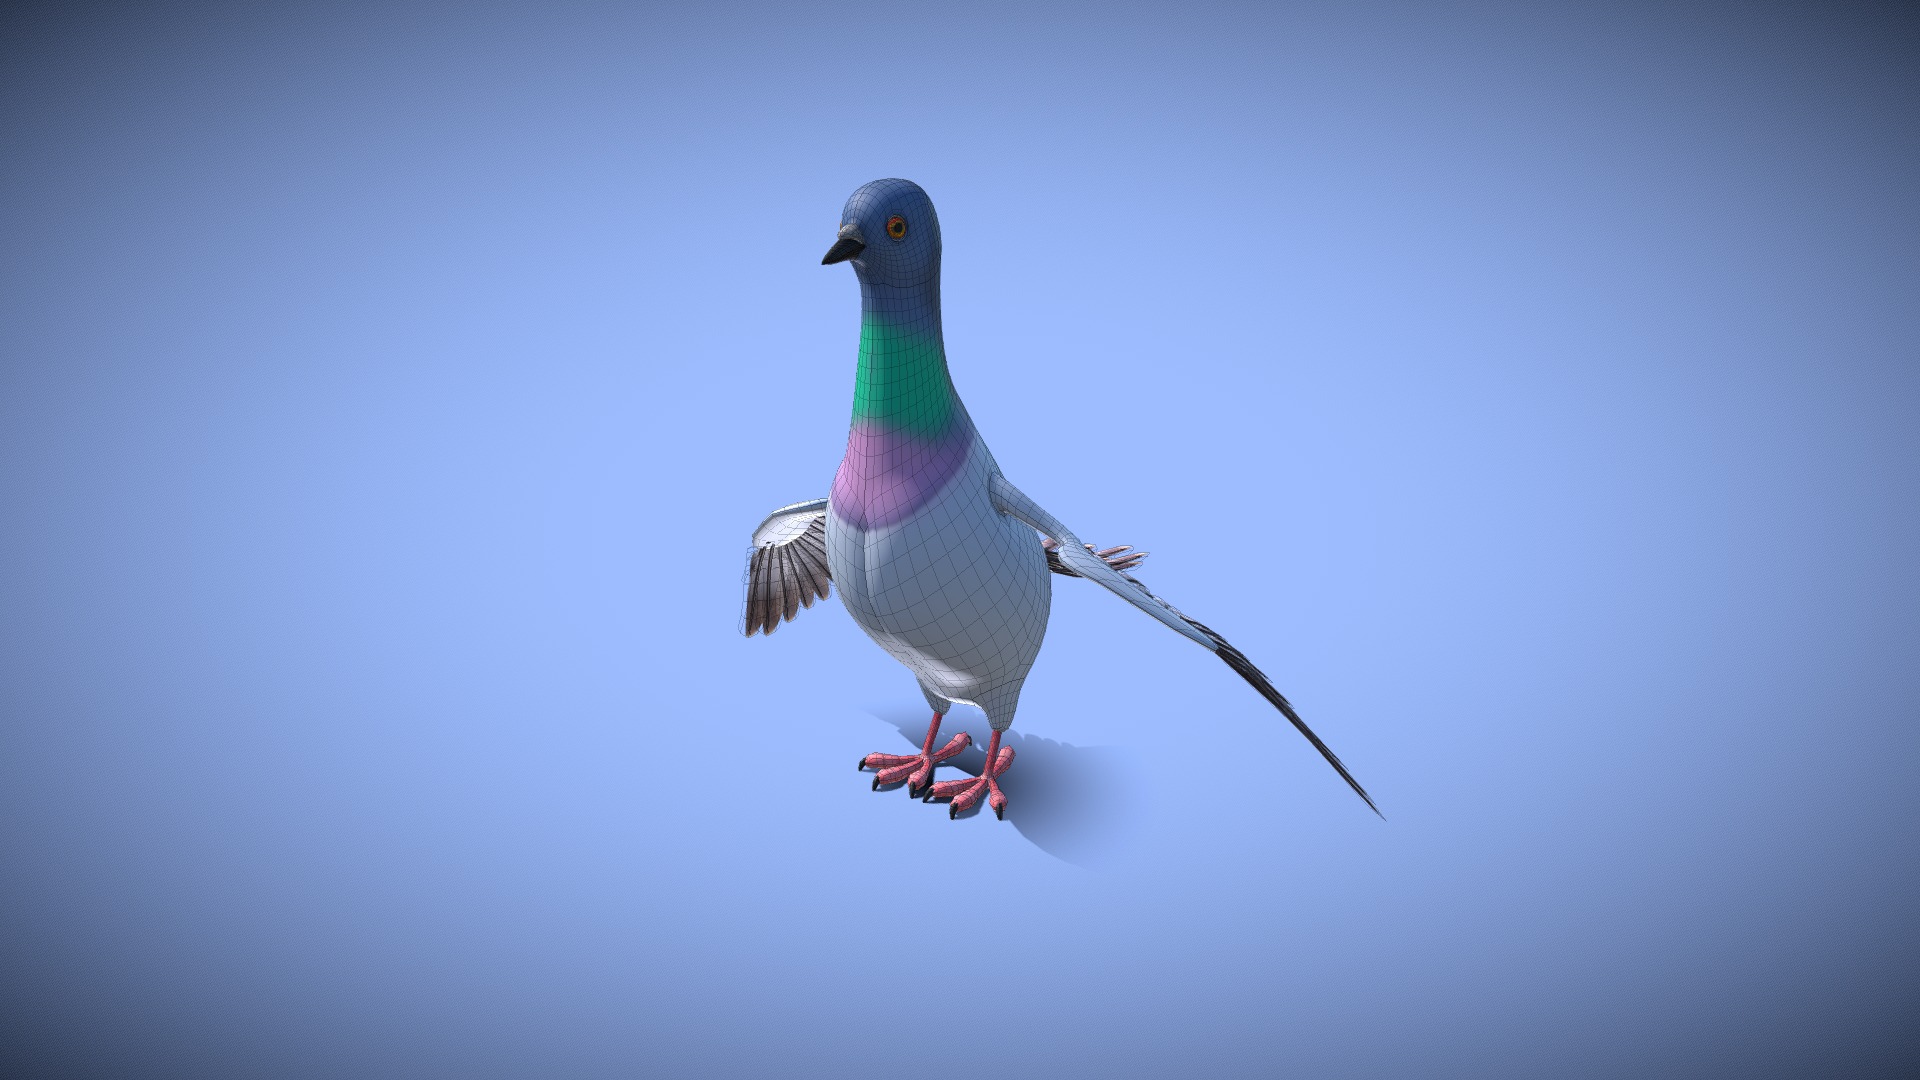 3D model Pigeon with feather system – Cartoon style - This is a 3D model of the Pigeon with feather system - Cartoon style. The 3D model is about a bird with a colorful head.